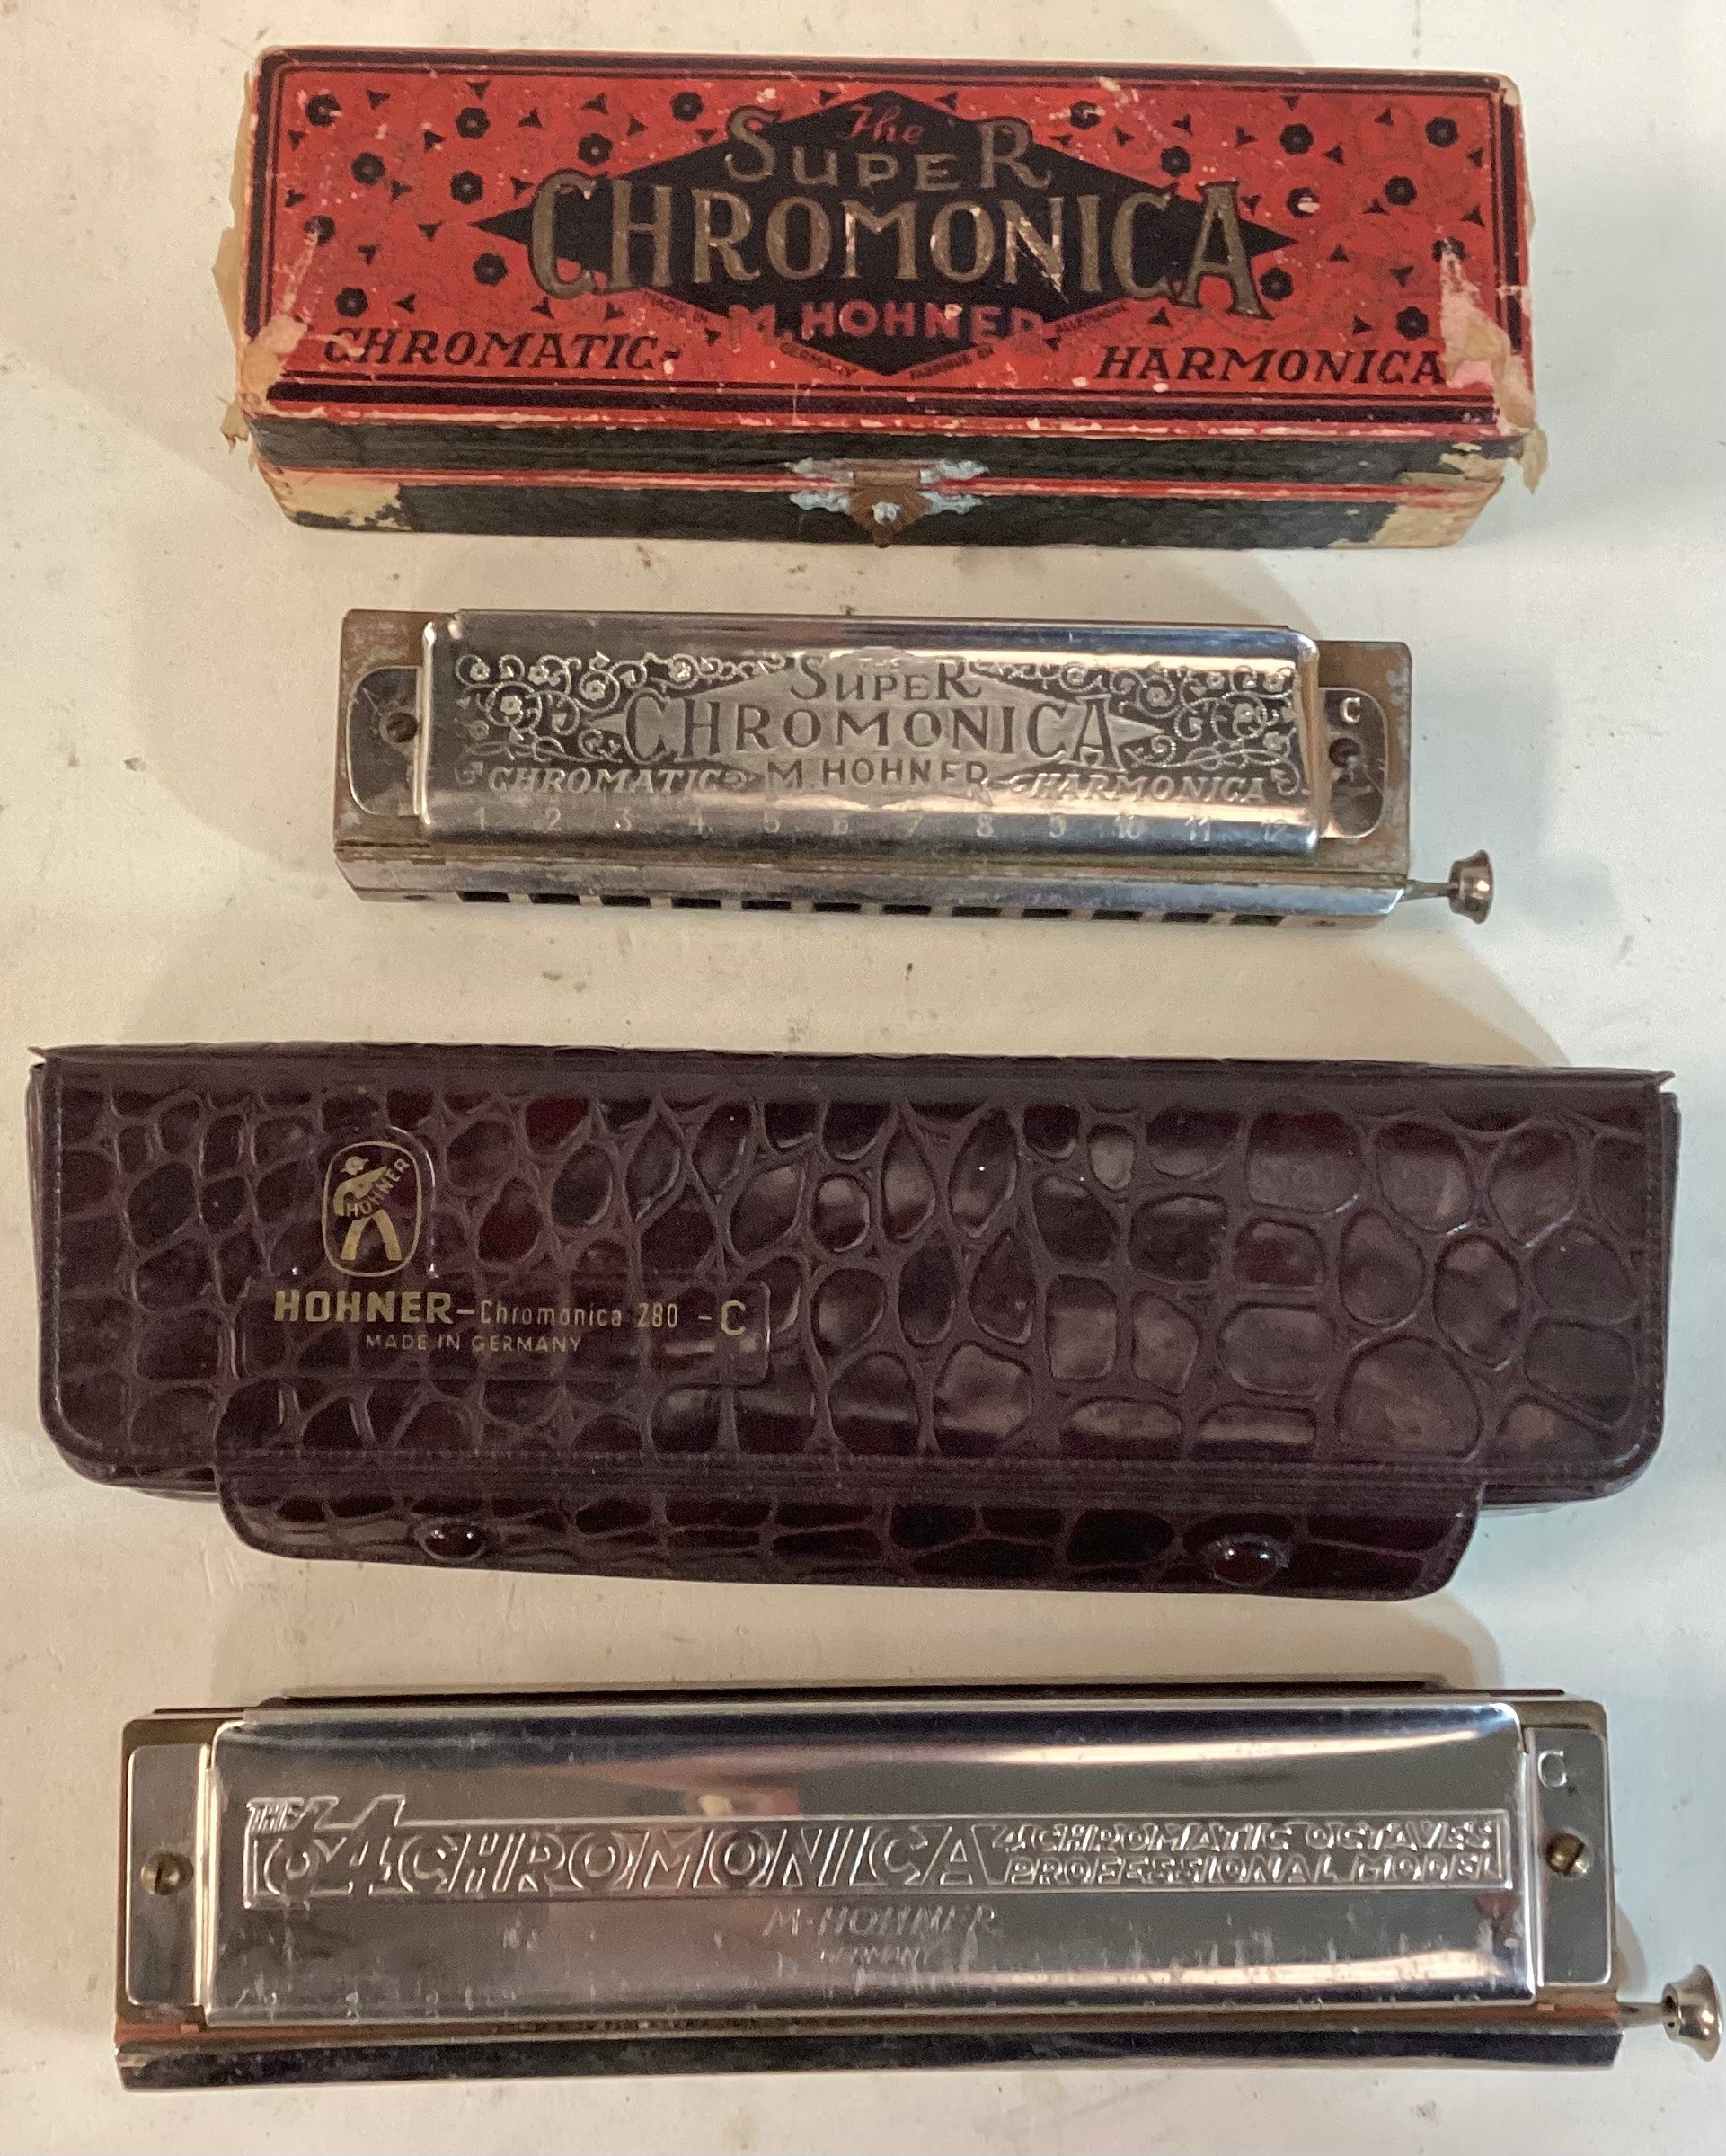 HOHNER HARMONICA’S X 2. Found here in their original containers we have a Professional Chromonica